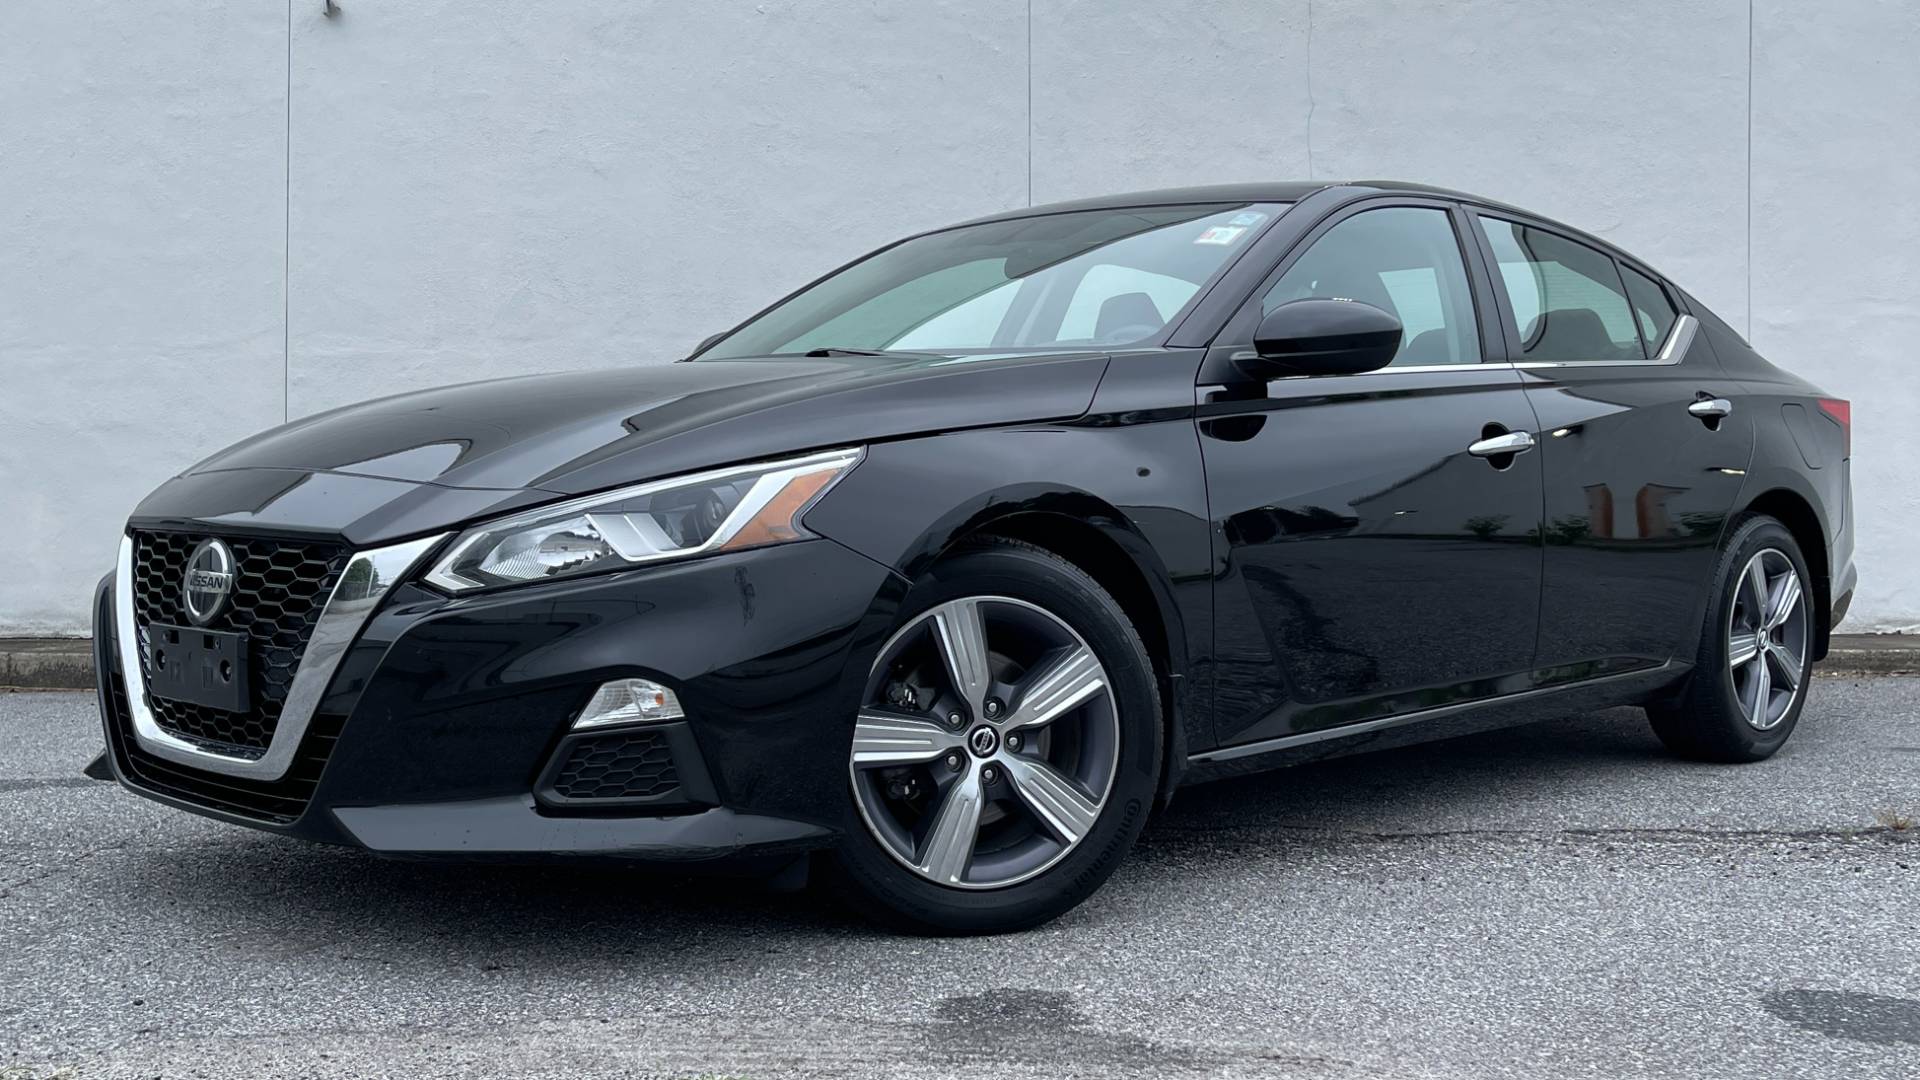 Used 2019 Nissan ALTIMA 2.5 S SEDAN / CVT AUTO / FWD / PROXIMITY KEY / REARVIEW for sale $22,295 at Formula Imports in Charlotte NC 28227 1